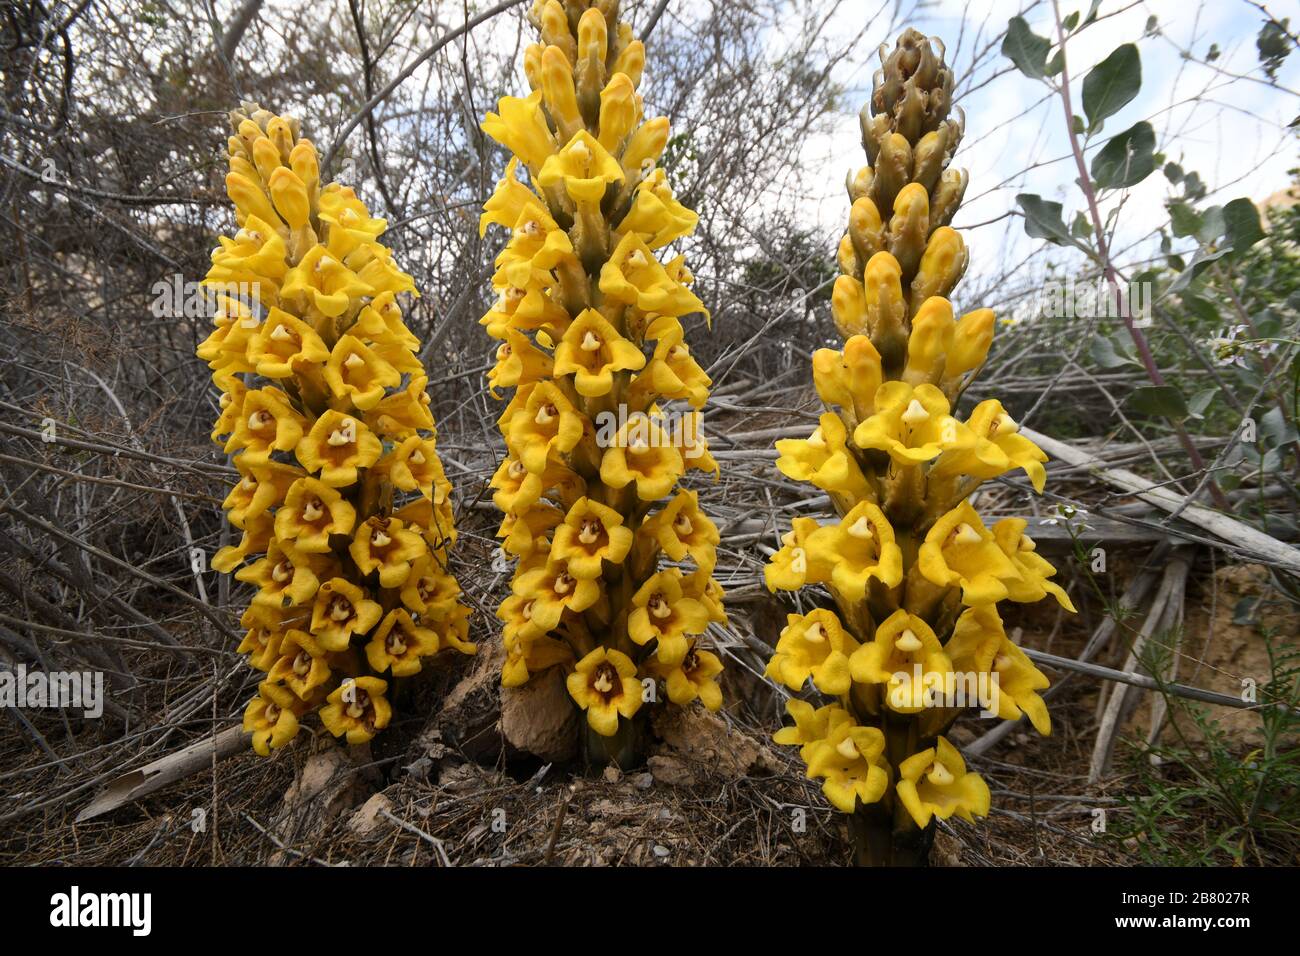 Yellow or desert broomrape, Cistanche tubulosa.  This plant is a parasitic member of the broomrape family. Photographed in the Negev Desert, Israel Stock Photo